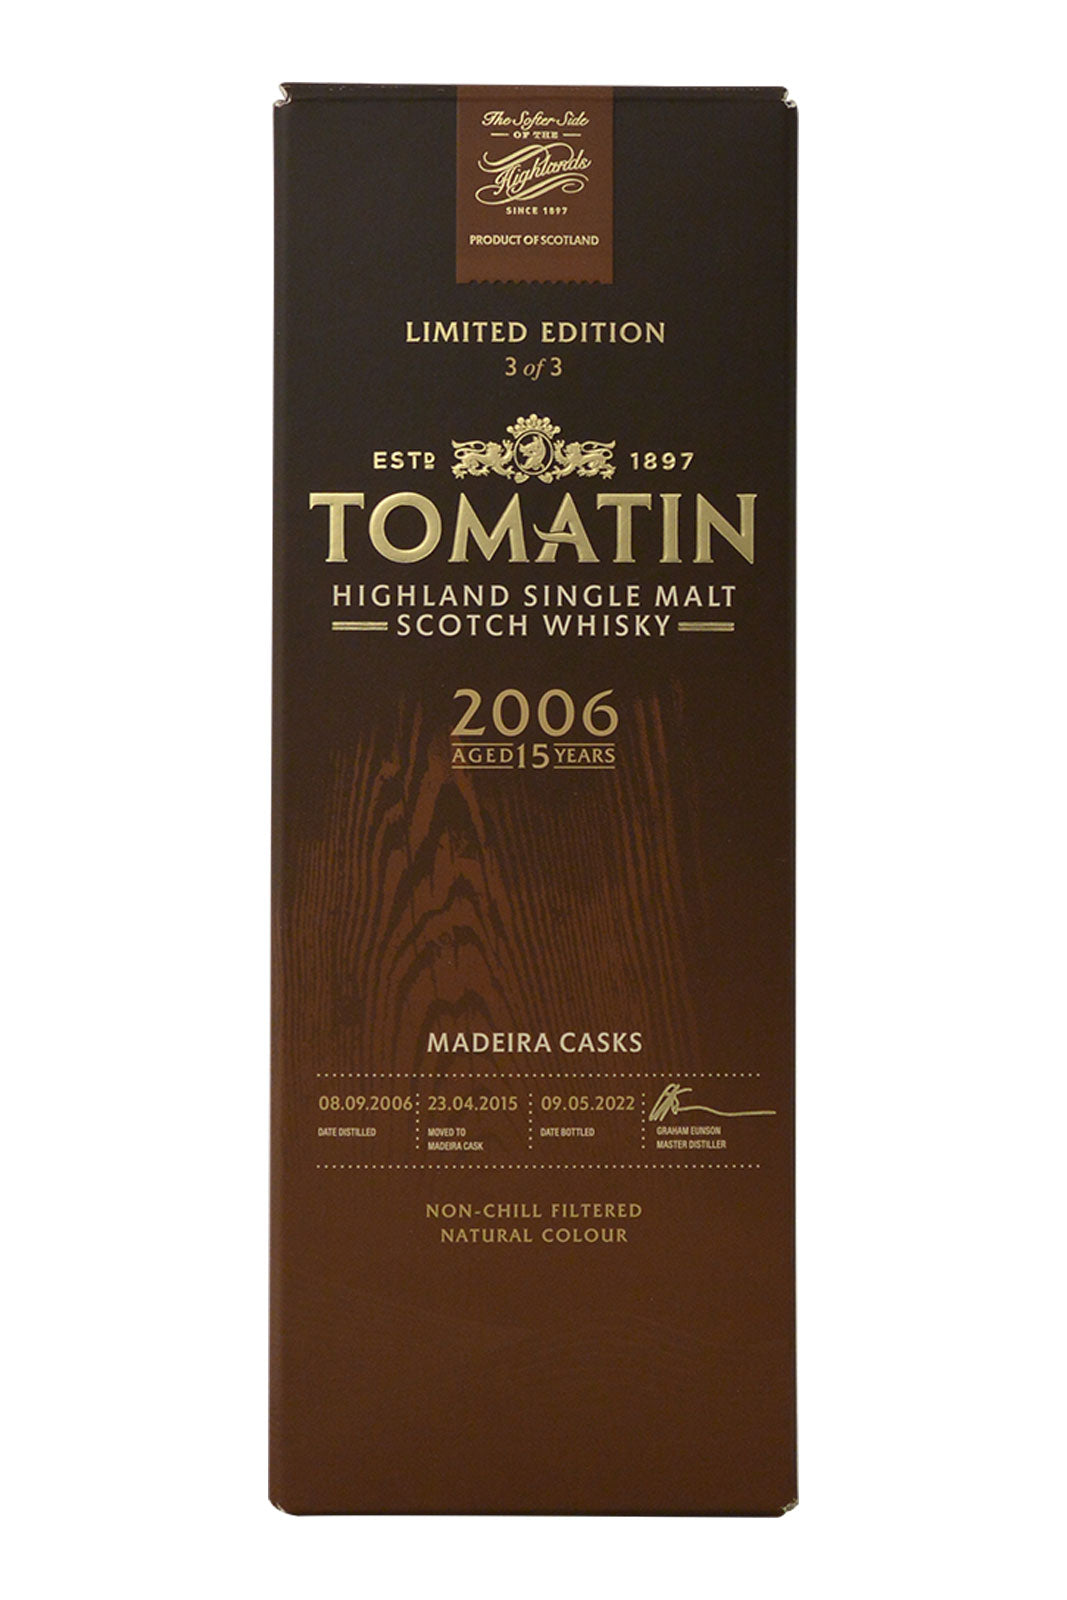 Tomatin 2006 Madeira Cask 15 Year Old